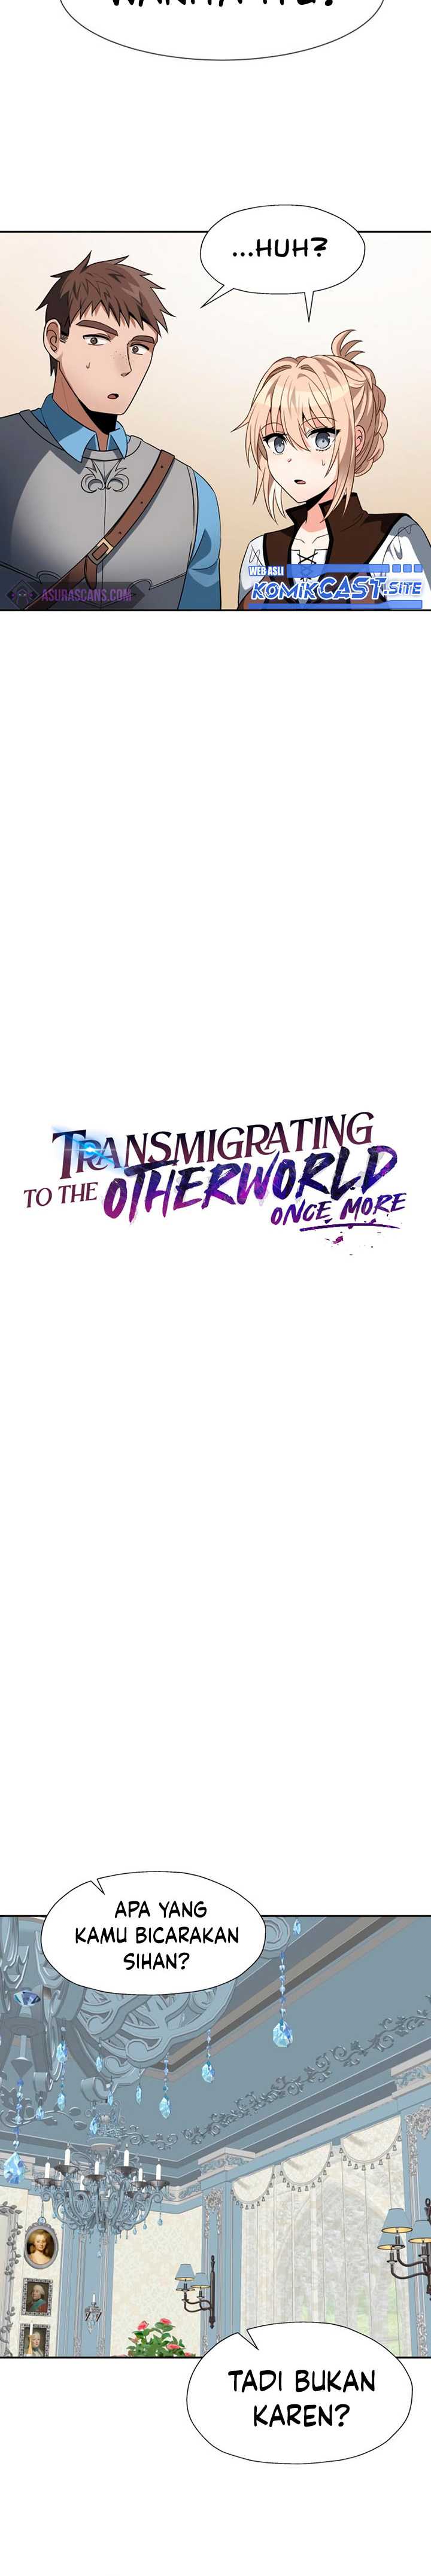 Transmigrating to the Otherworld Once More Chapter 44